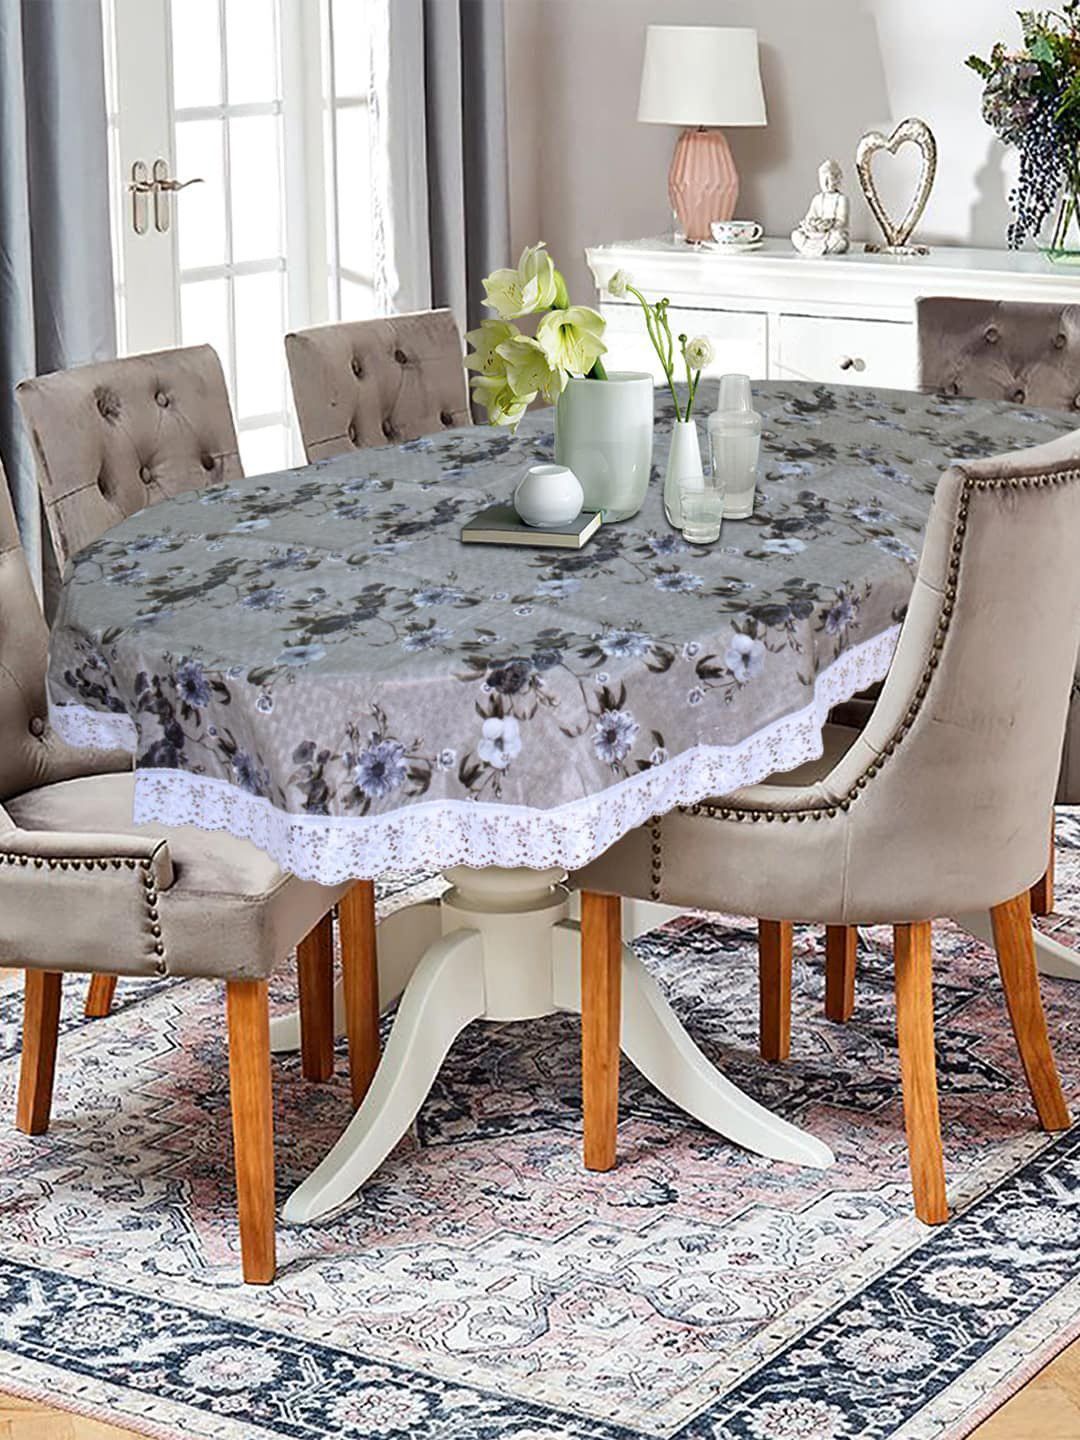 Kuber Industries Grey Flower Printed 6 Seater Oval Shape Table Cover Price in India